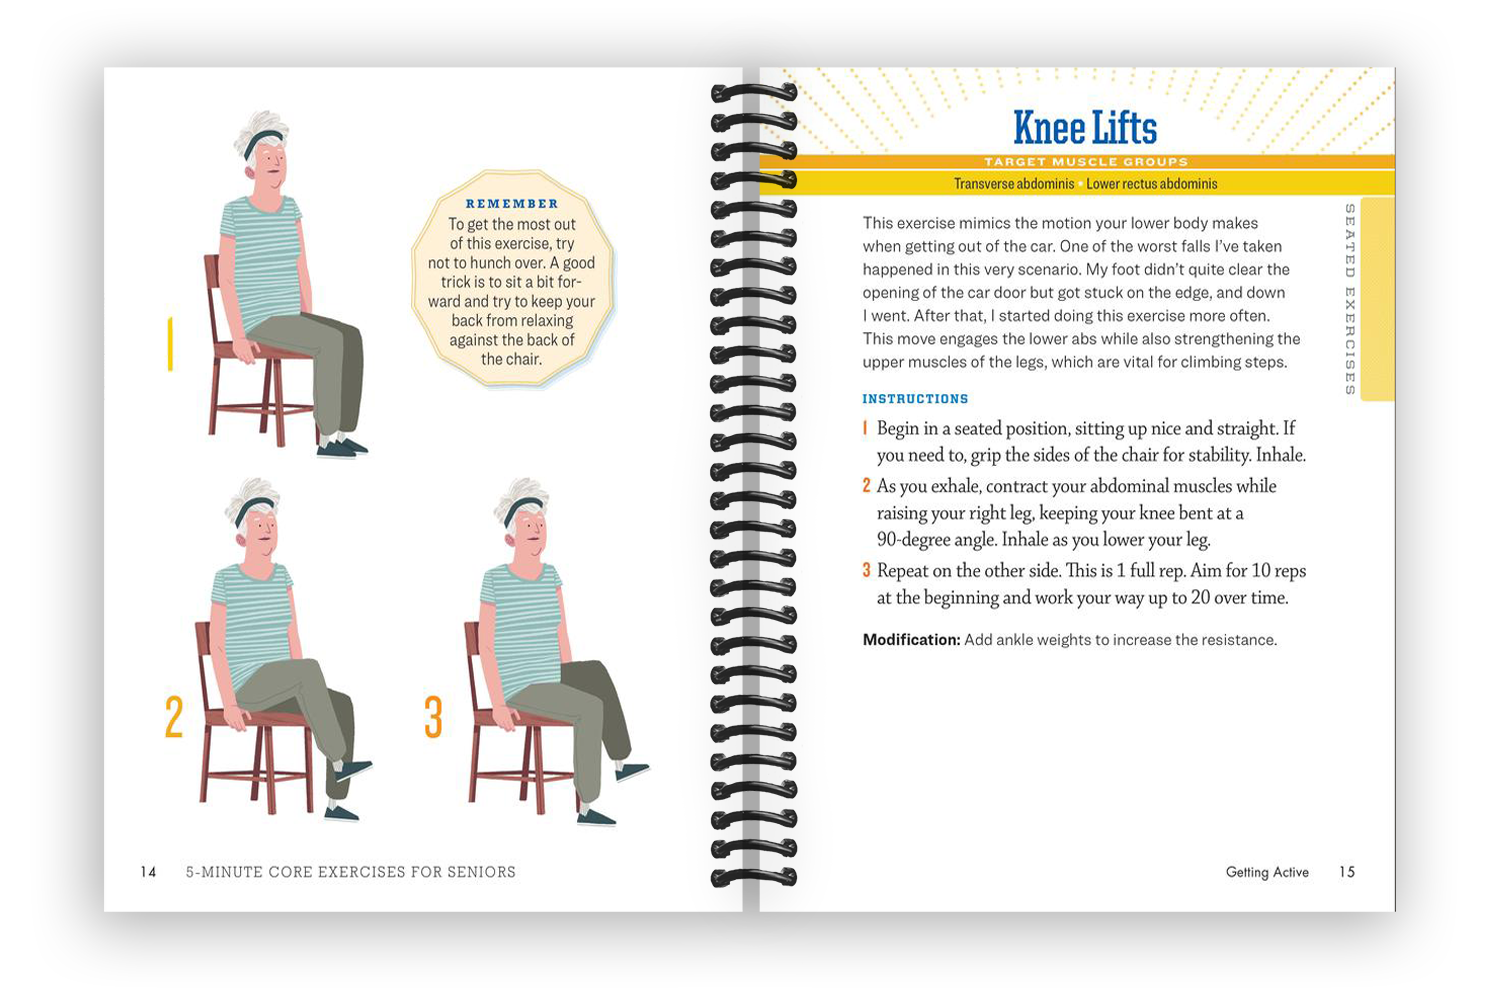 5 minutes core exercises for seniors: 20 Daily home exercises to help  relieve back-pain build balance and increase confidence